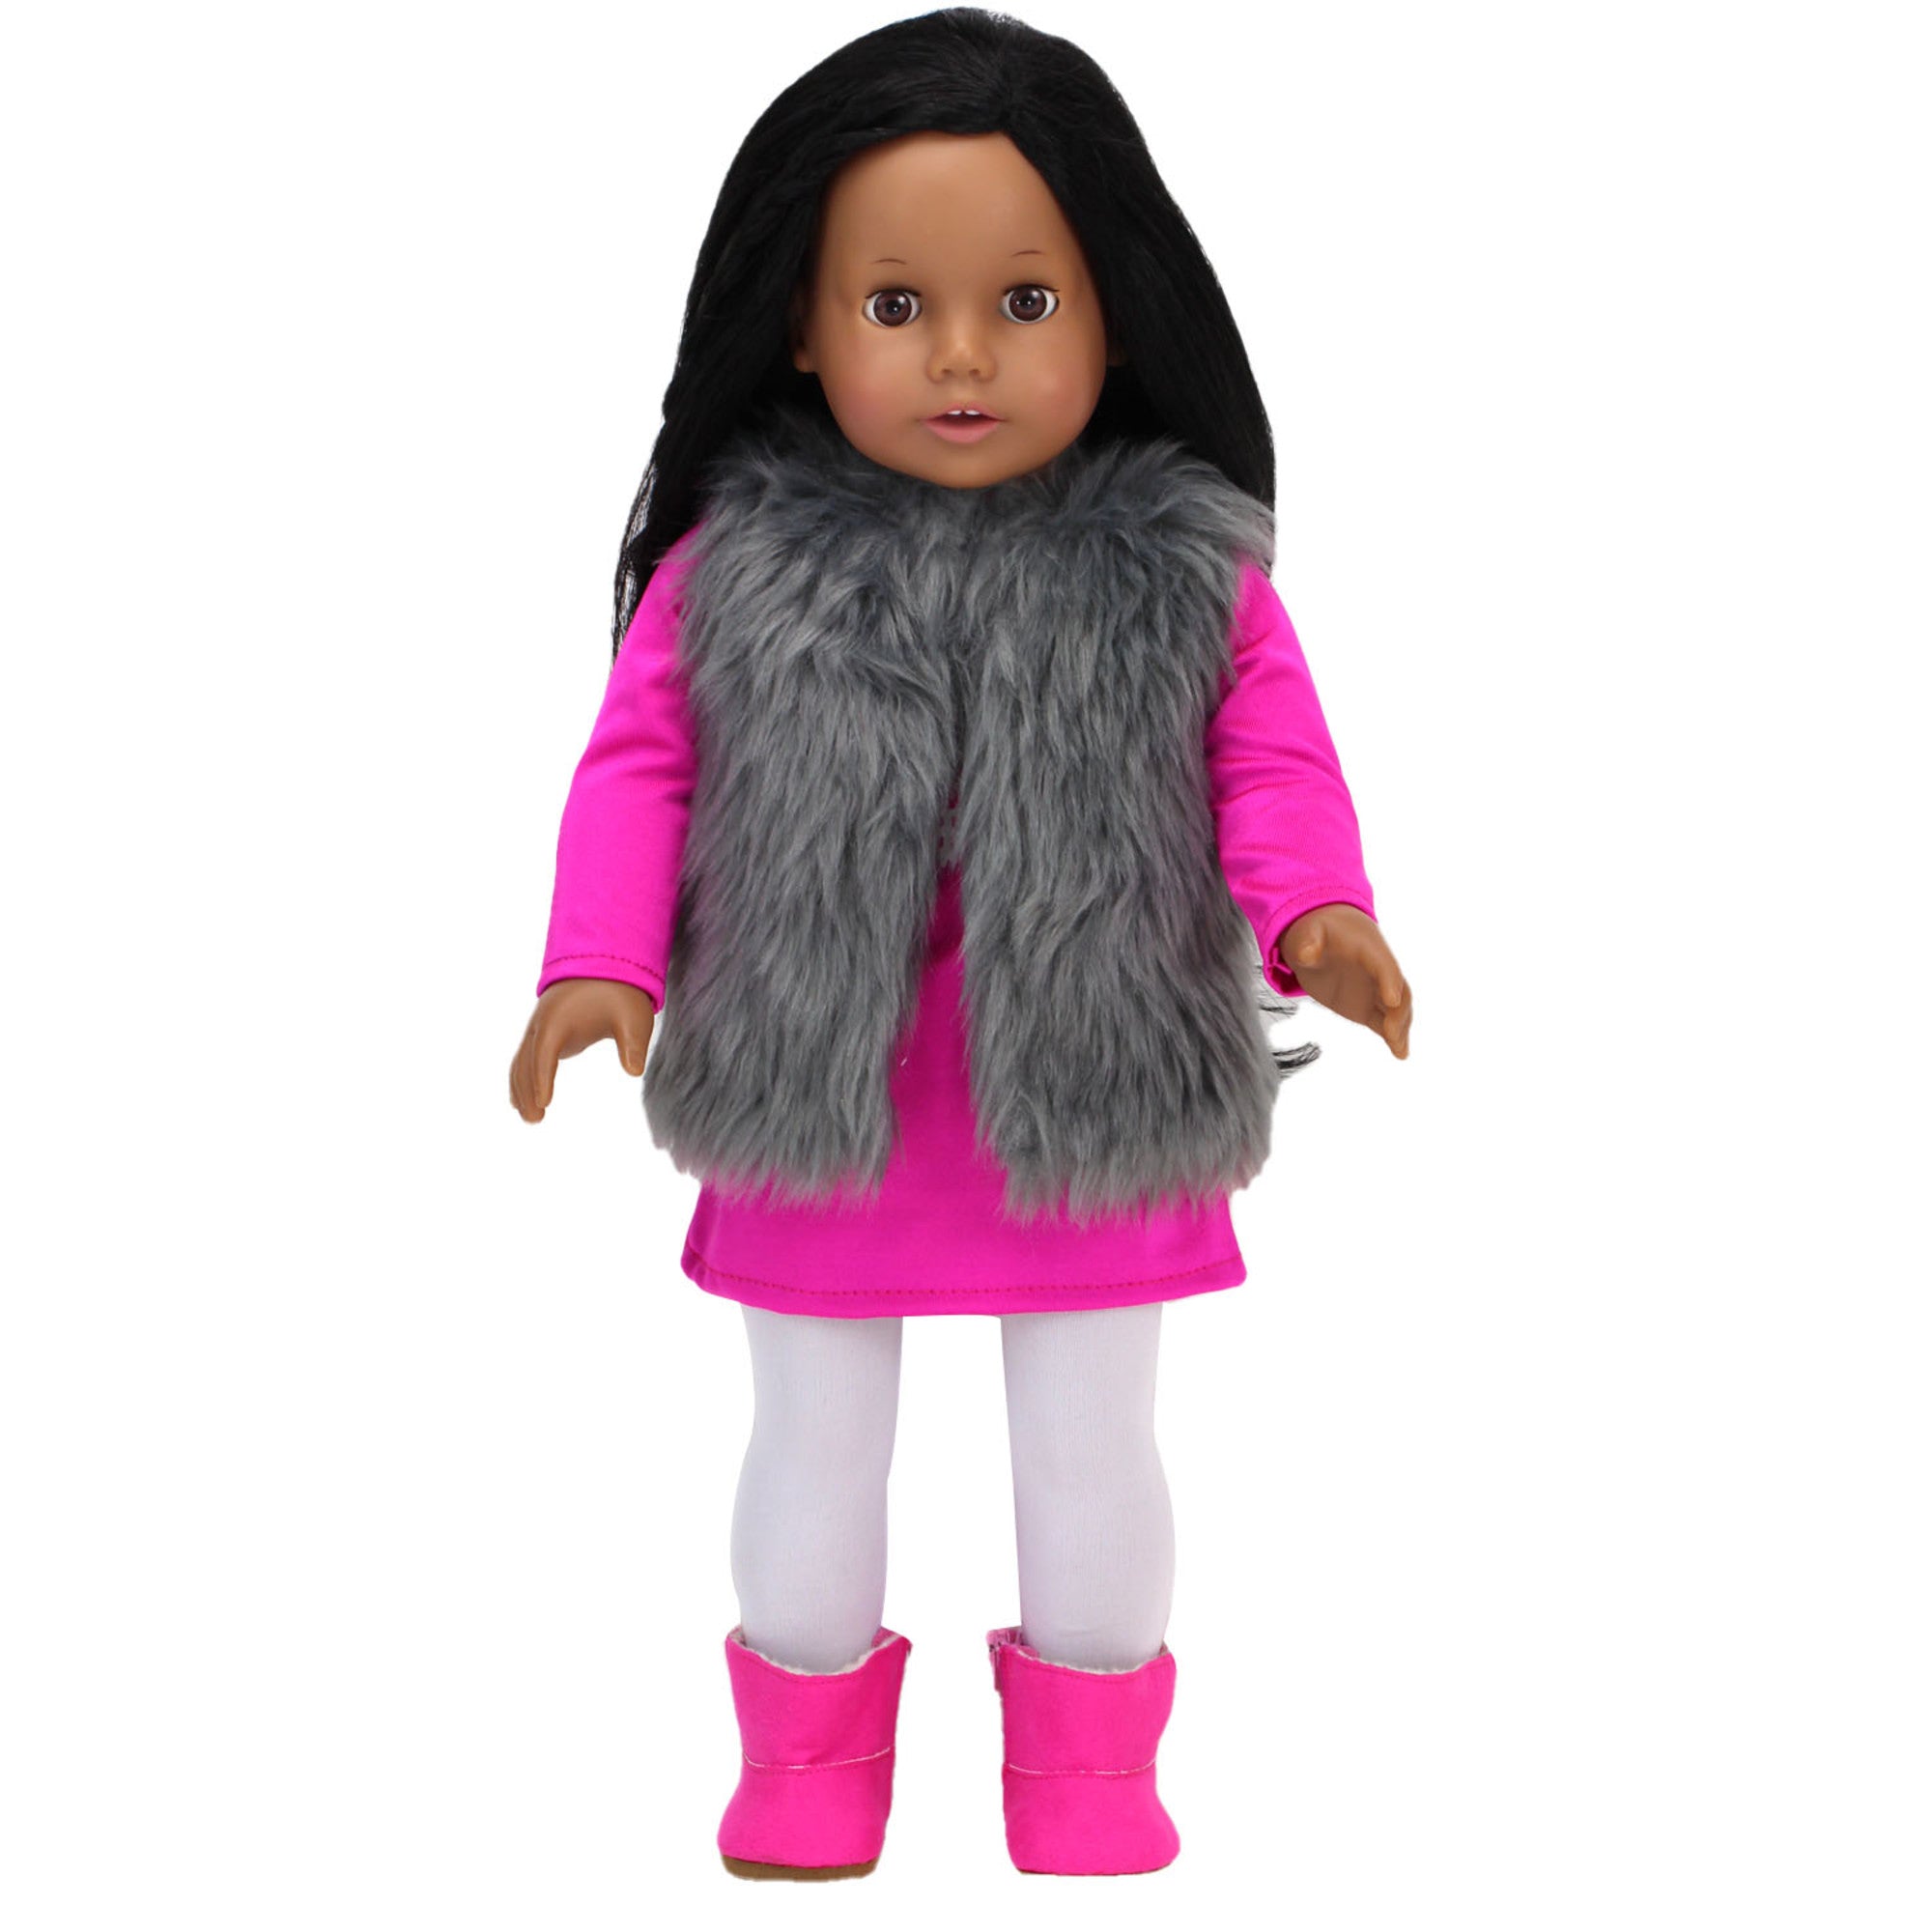 Sophia’s Snowflake T-Shirt Tunic Dress, Shaggy Faux Fur Vest, Solid-Colored Leggings, & Booties Winter Outfit Set for 18” Dolls, Hot Pink/Silver/White